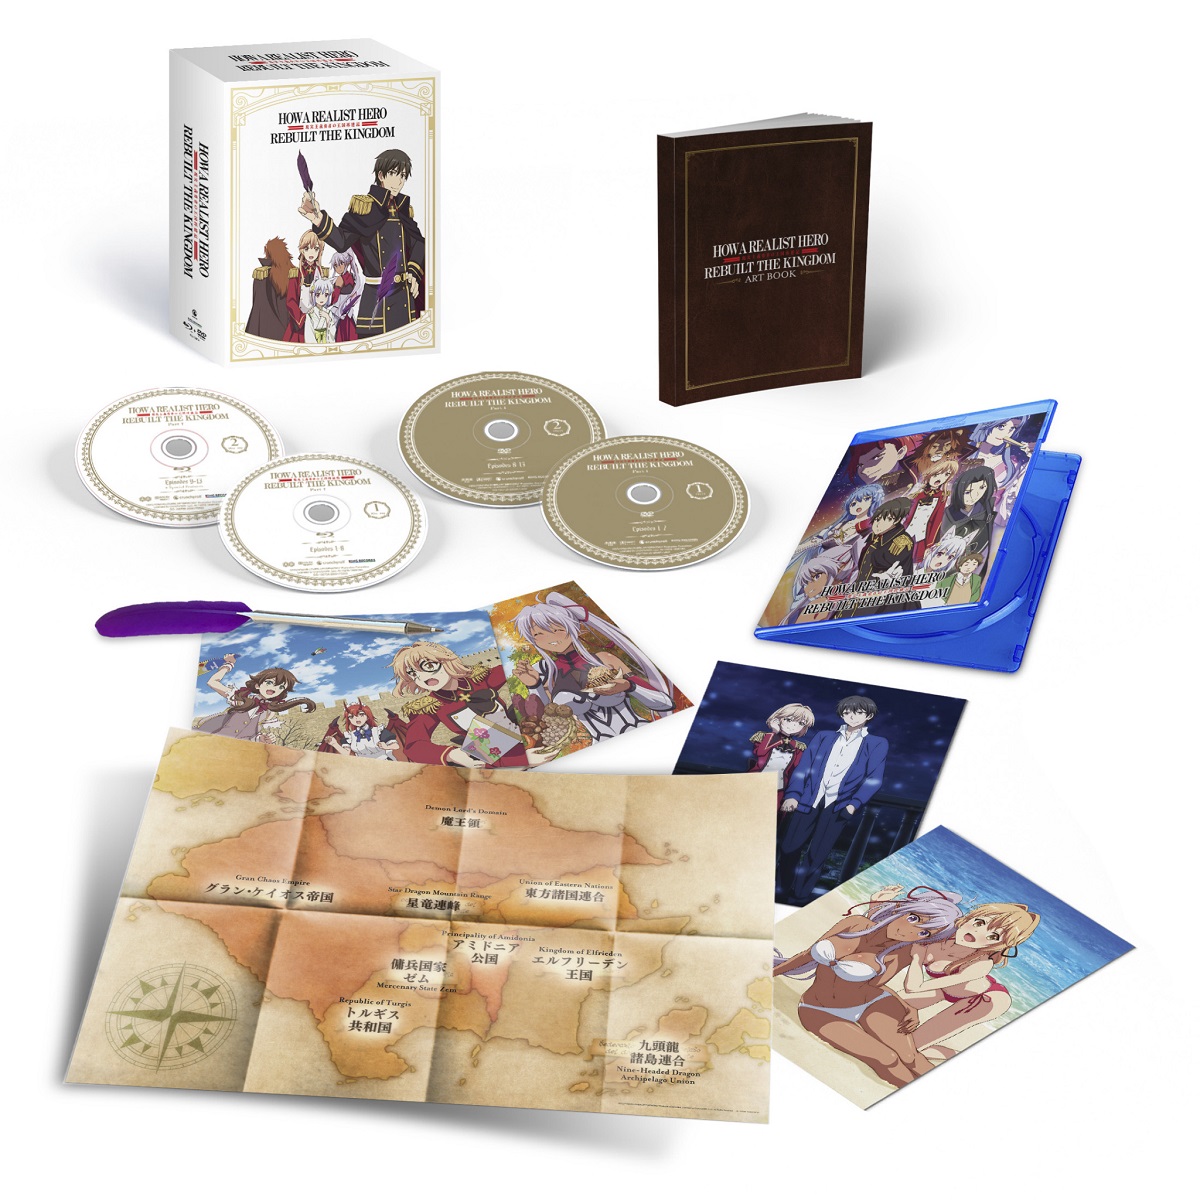 How a Realist Hero Rebuilt the Kingdom Part 1 Limited Edition Blu-ray/DVD image count 1